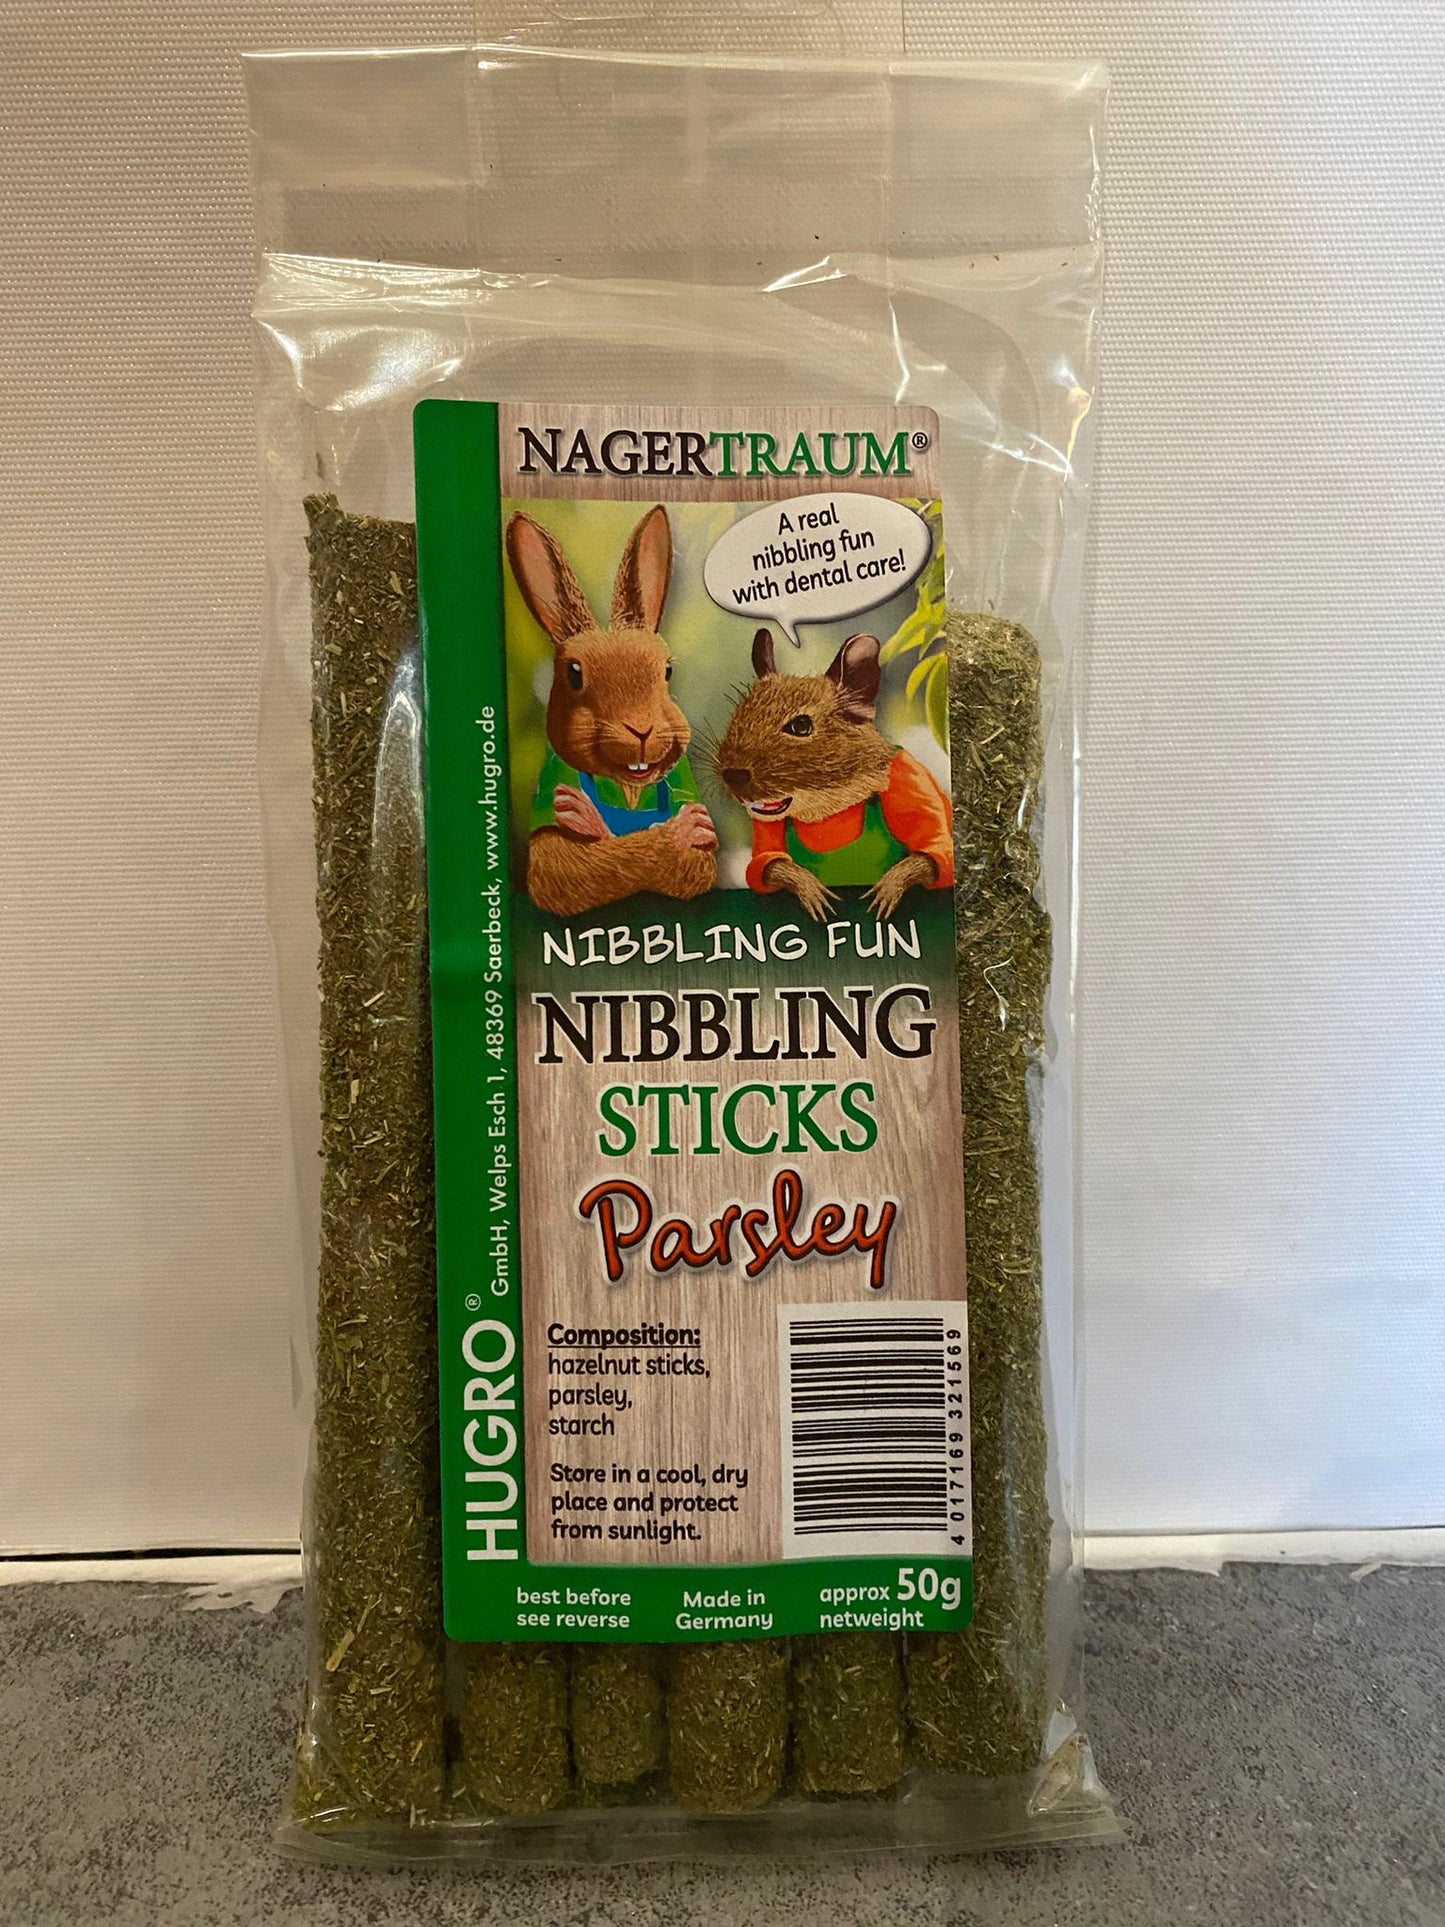 Hugro nibbling sticks with parsley 50g.